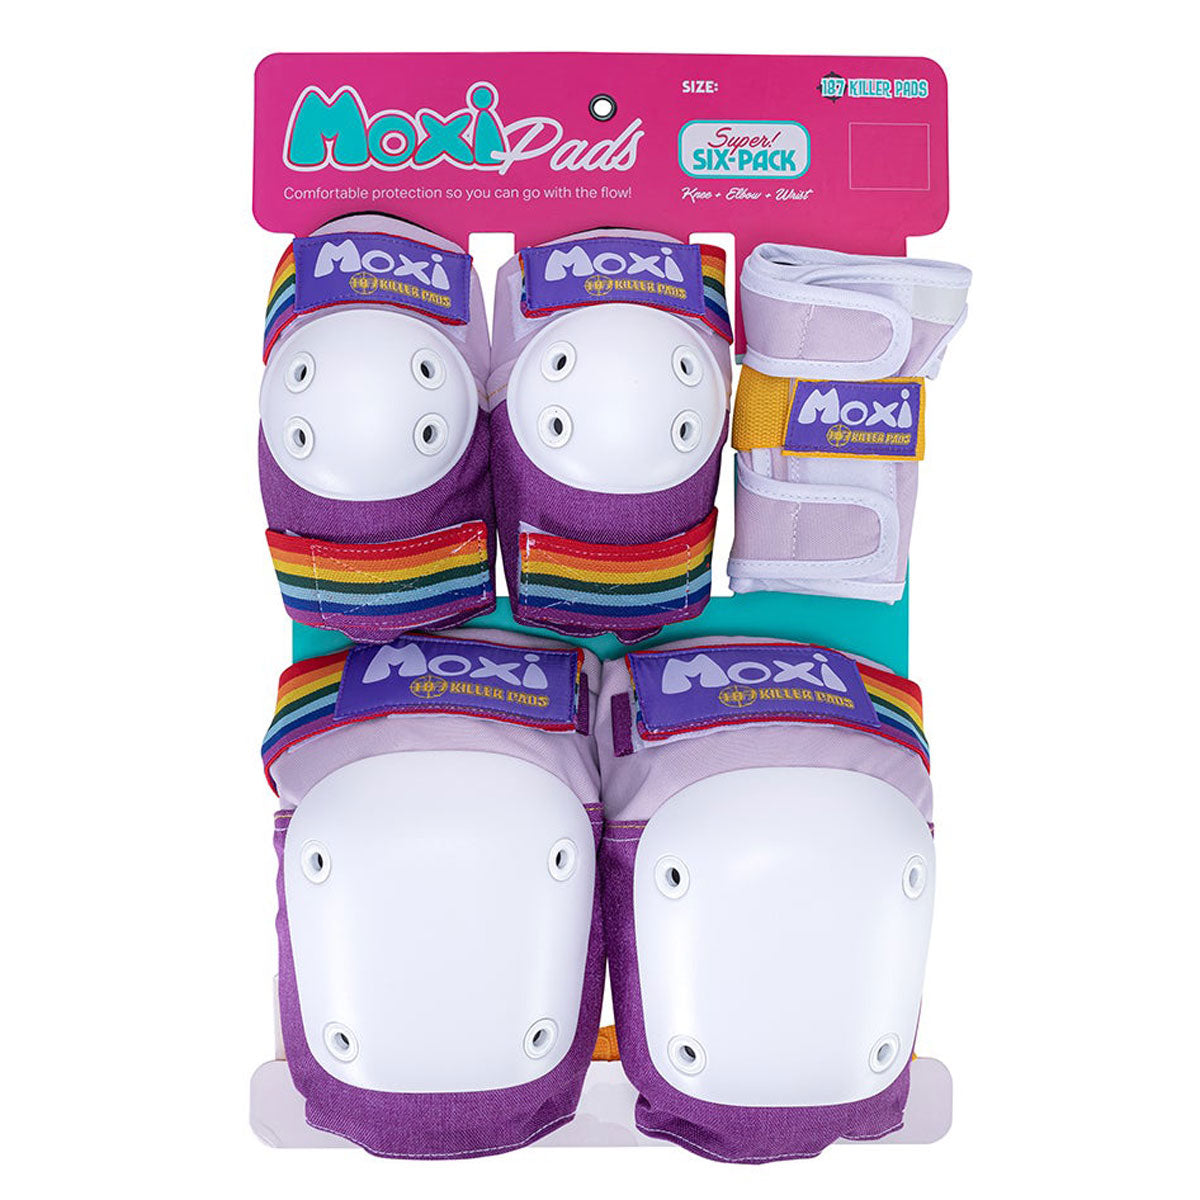 187 Six Pack of Adult Pads - MOXI Lavender image 1